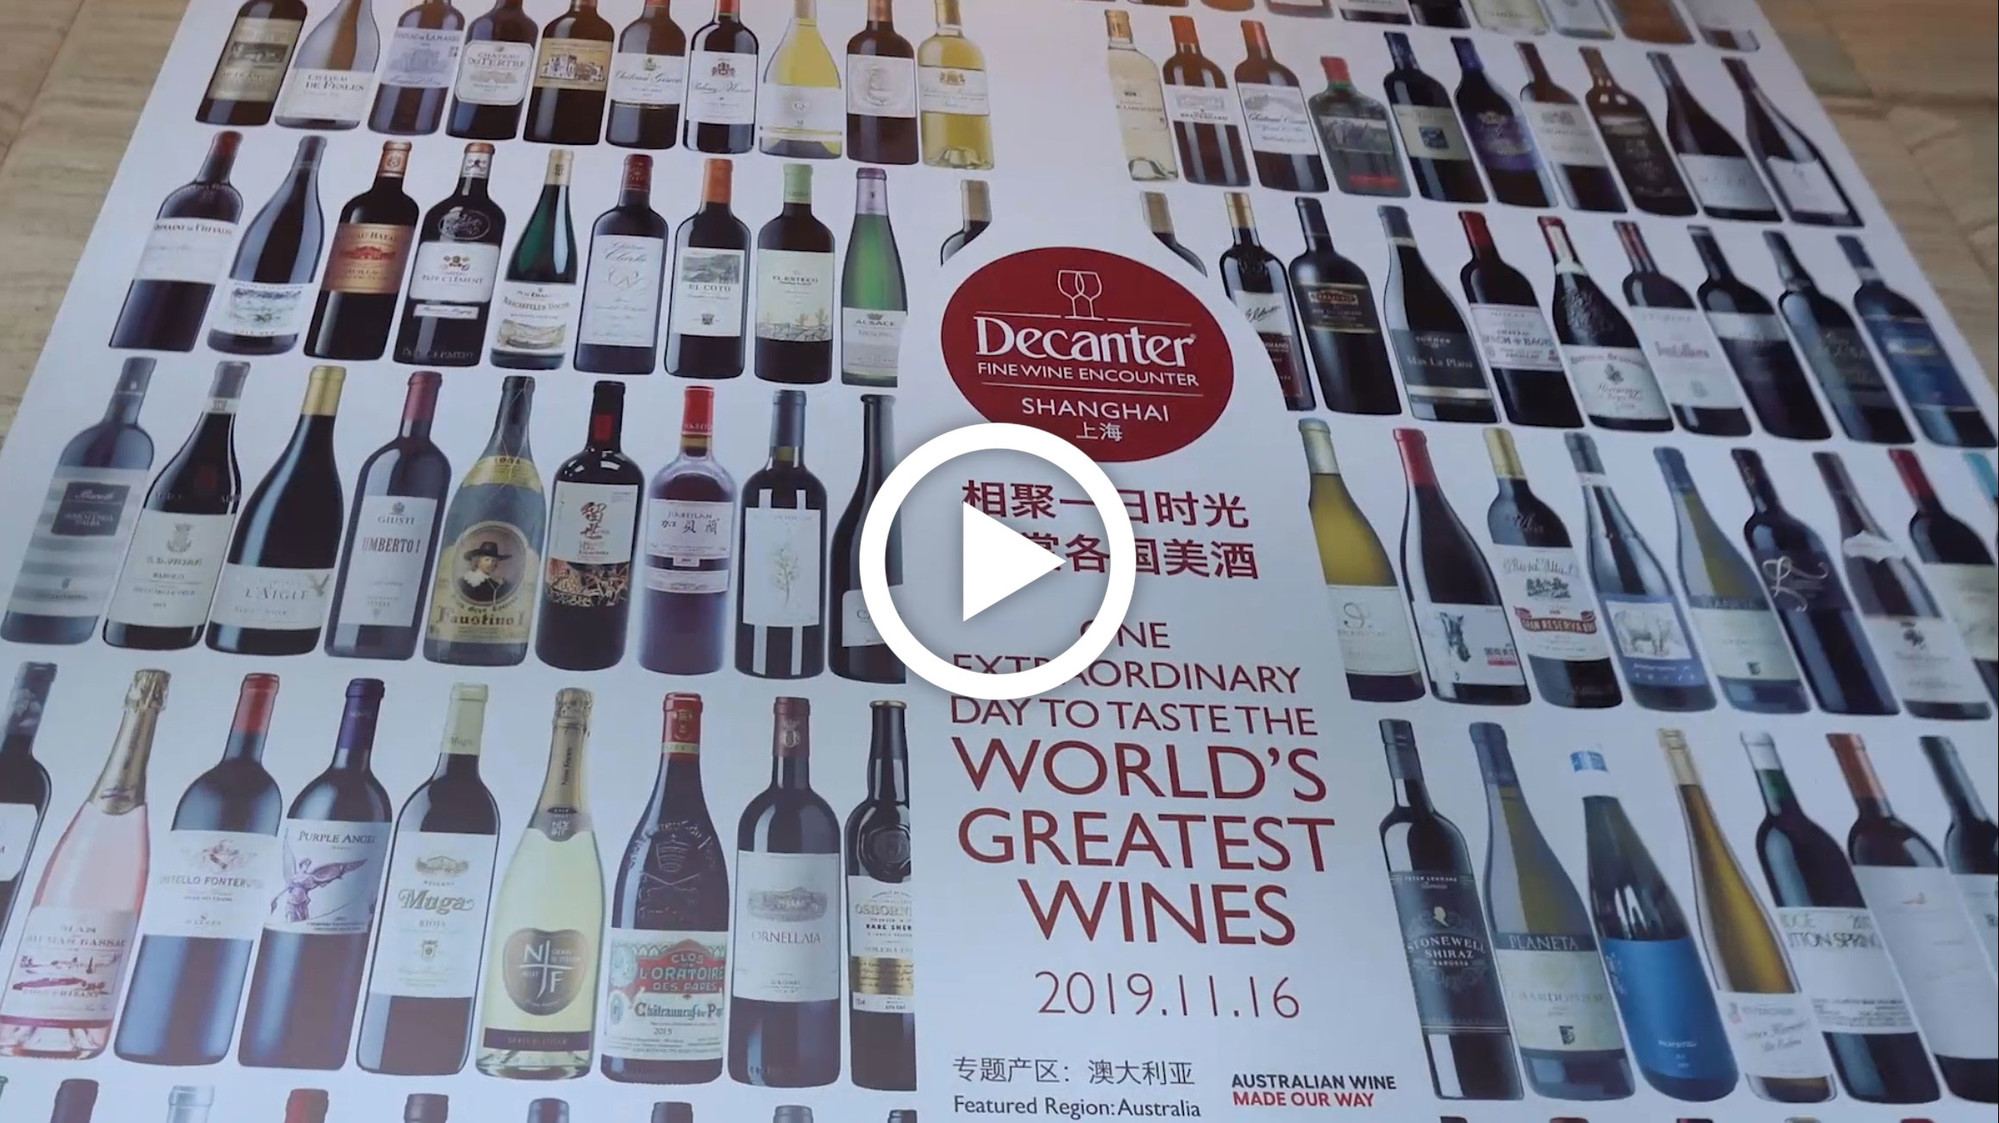 Highlight video of the Decanter Shanghai Fine Wine Encounter 2019